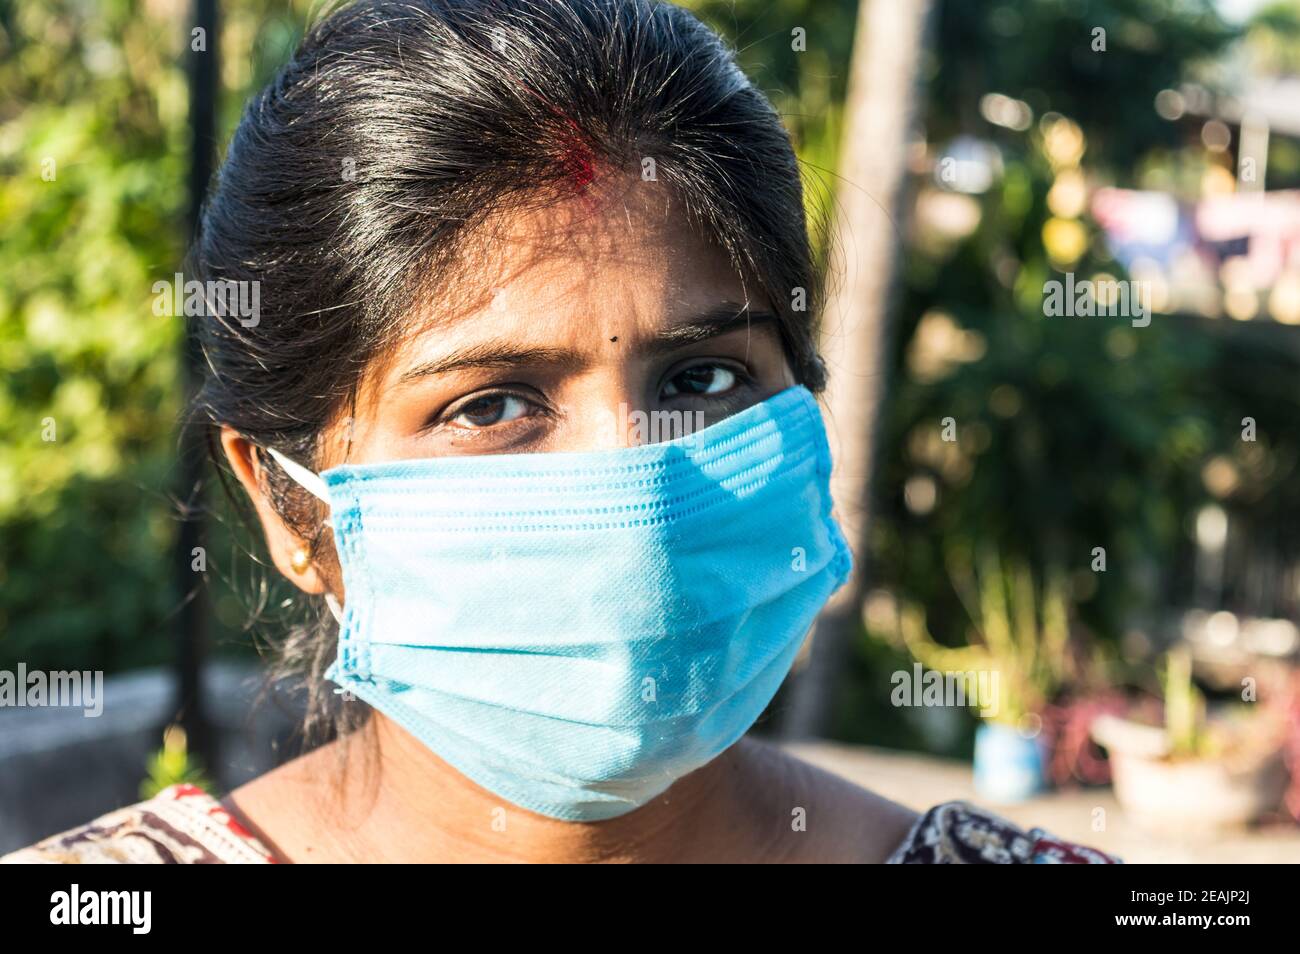 Smiling face wearing mask. Woman smiling wearing a face mask. Close up Front view of a happy Indian woman wearing a face mask smiling and looking at camera. Healthcare medicine background India. Stock Photo